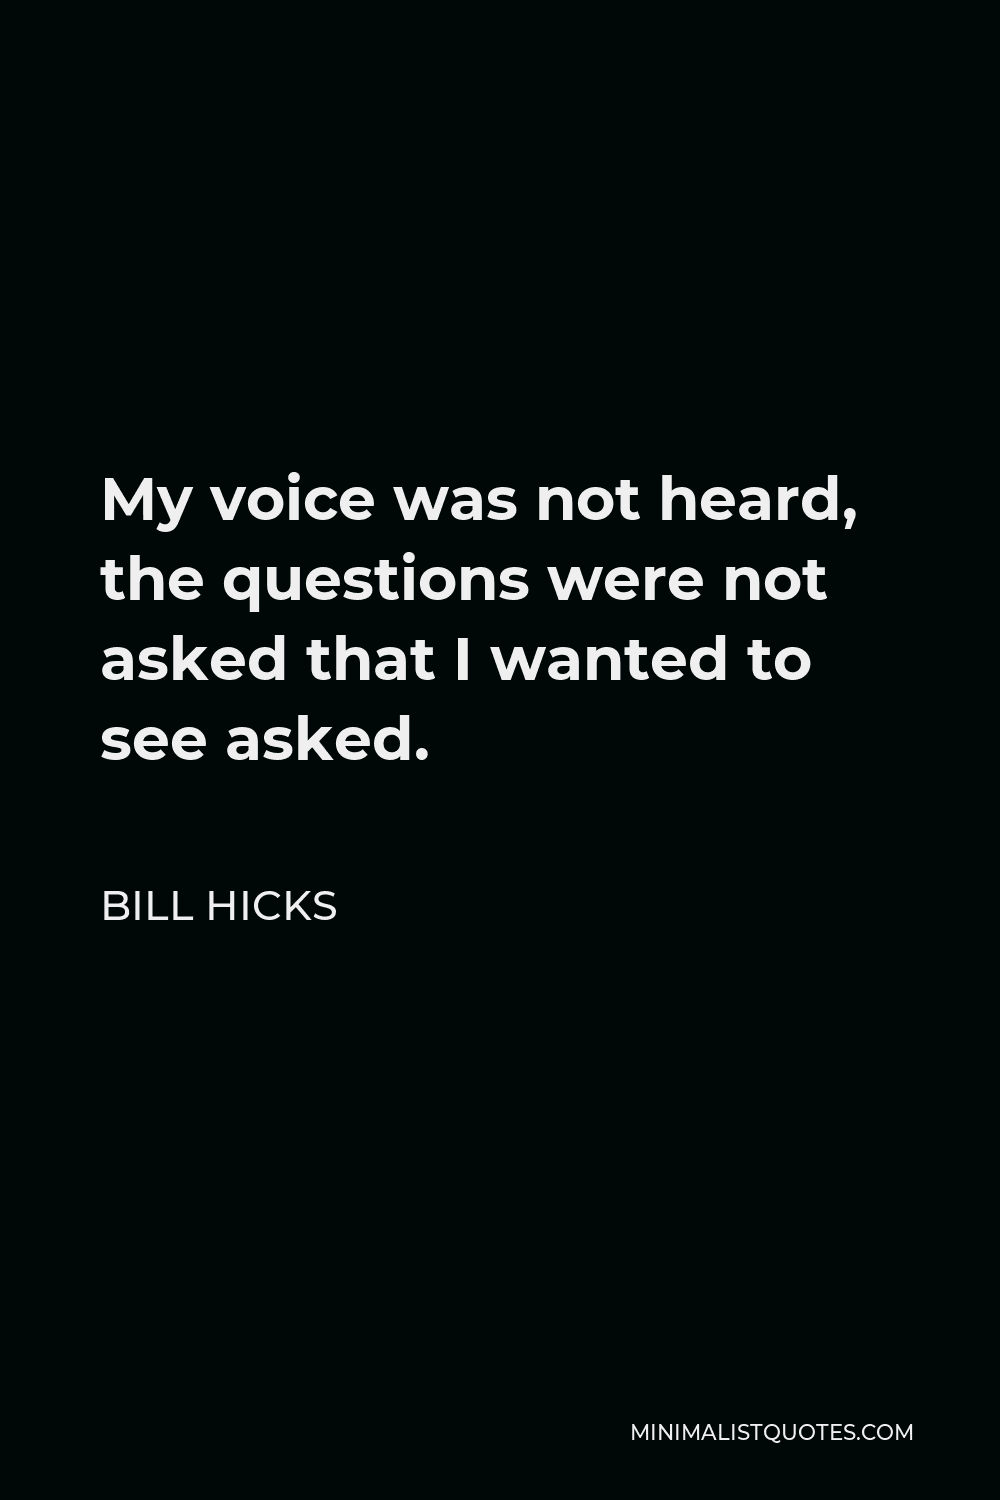 Bill Hicks Quote - My voice was not heard, the questions were not asked that I wanted to see asked.